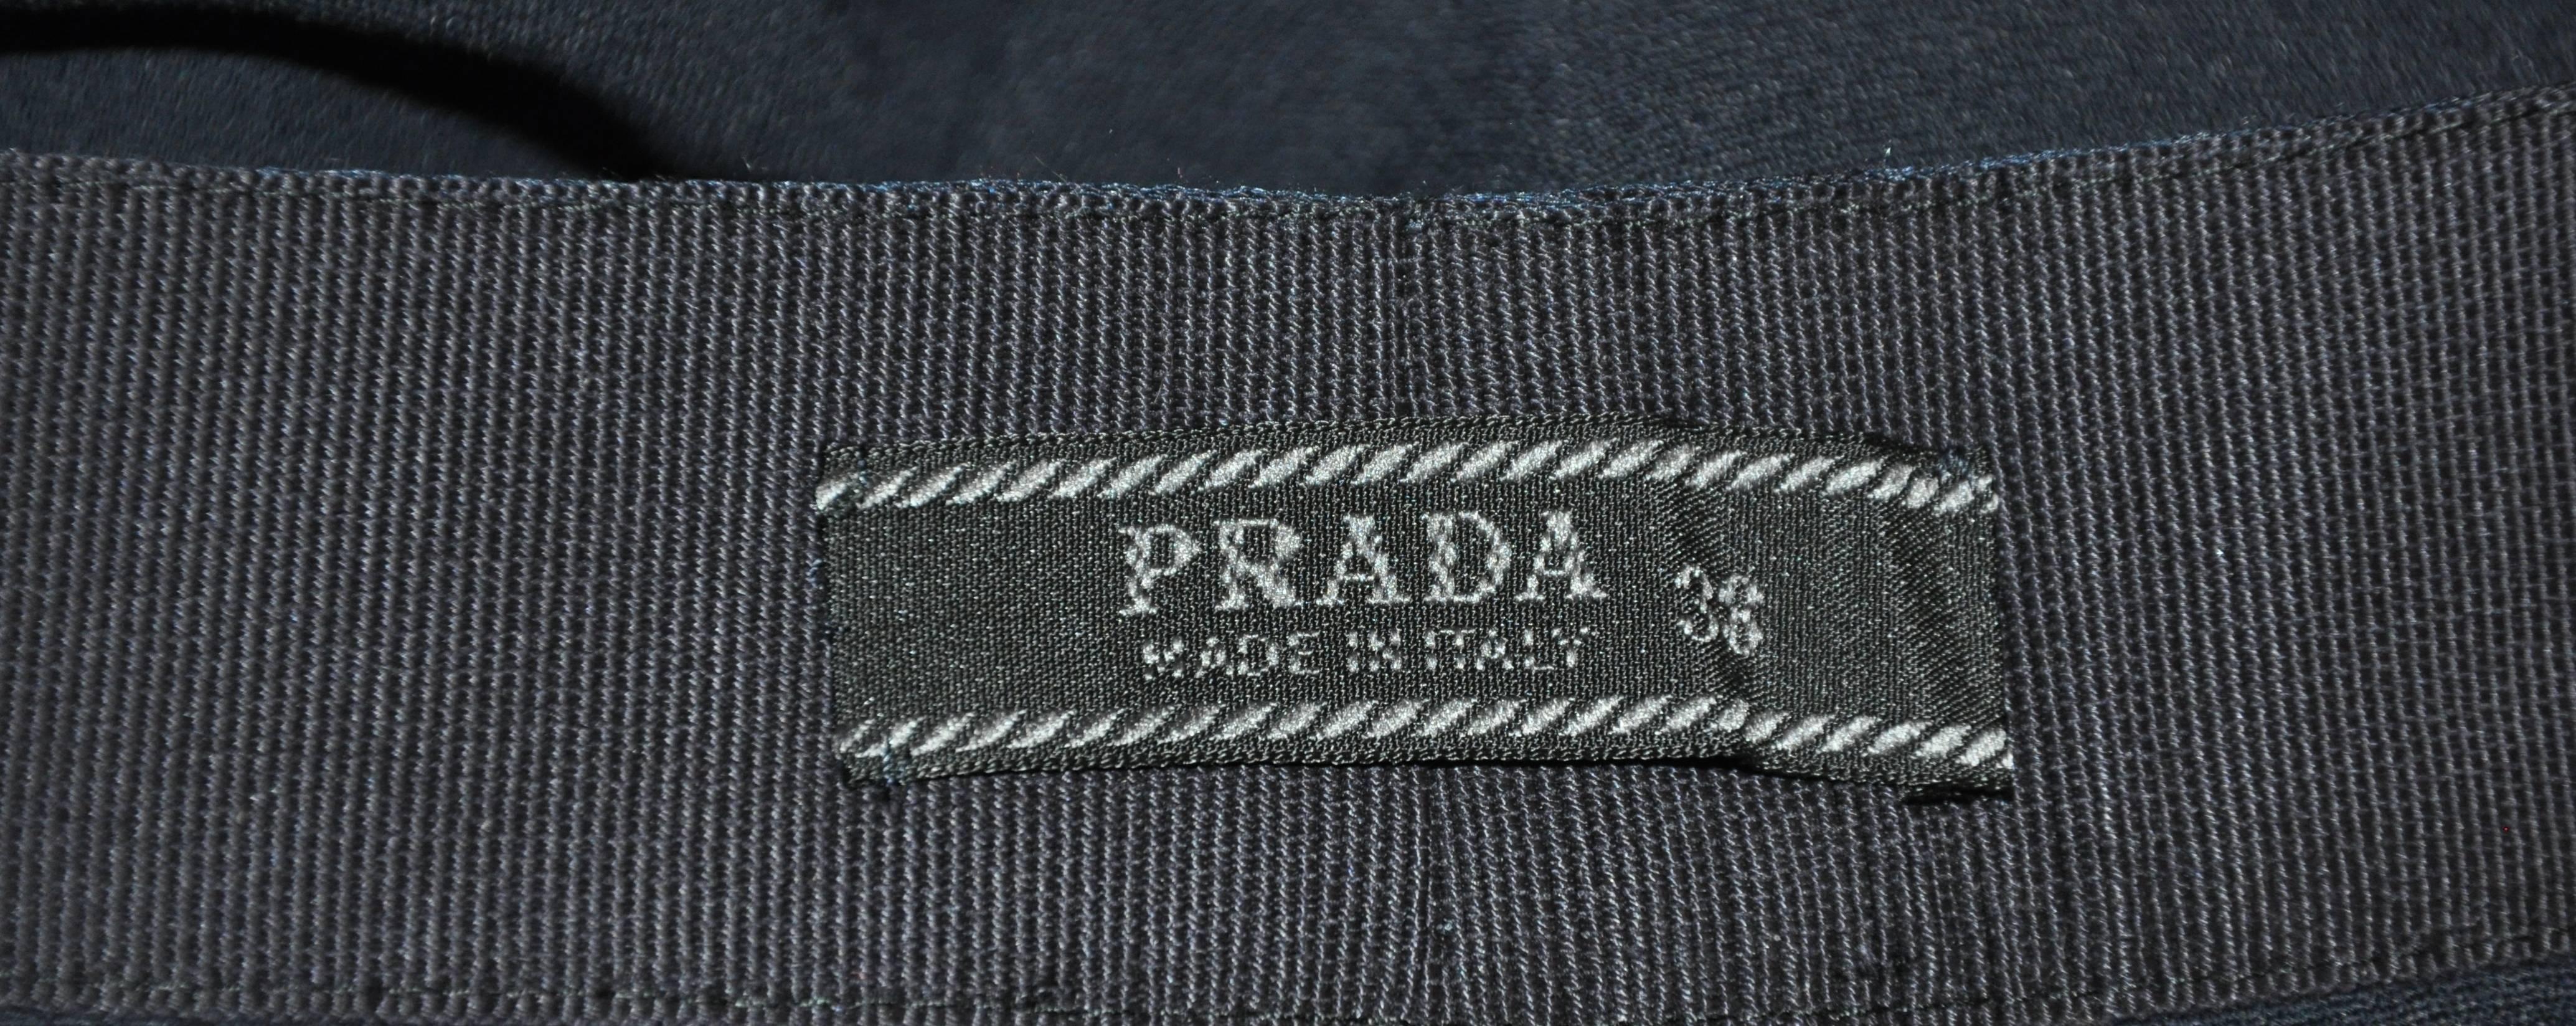           Prada navy tapered trousers are detailed with a silk ribbon waistband which measures 1 1/2